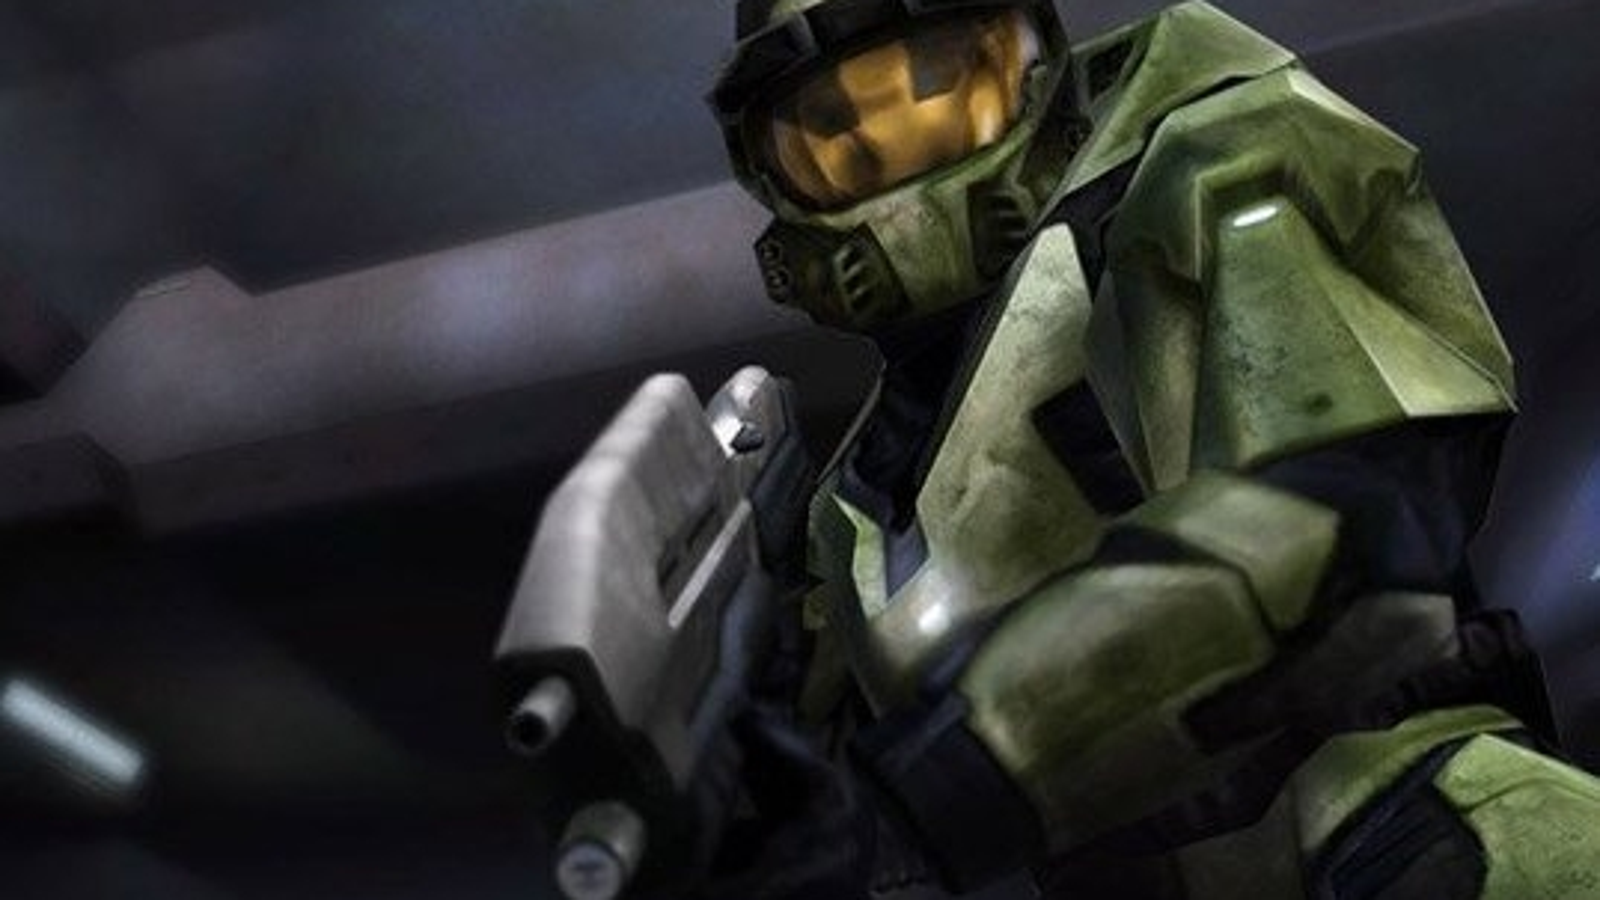 Halo: Combat Evolved multiplayer will survive in the face of Gamespy  shutdown - Polygon